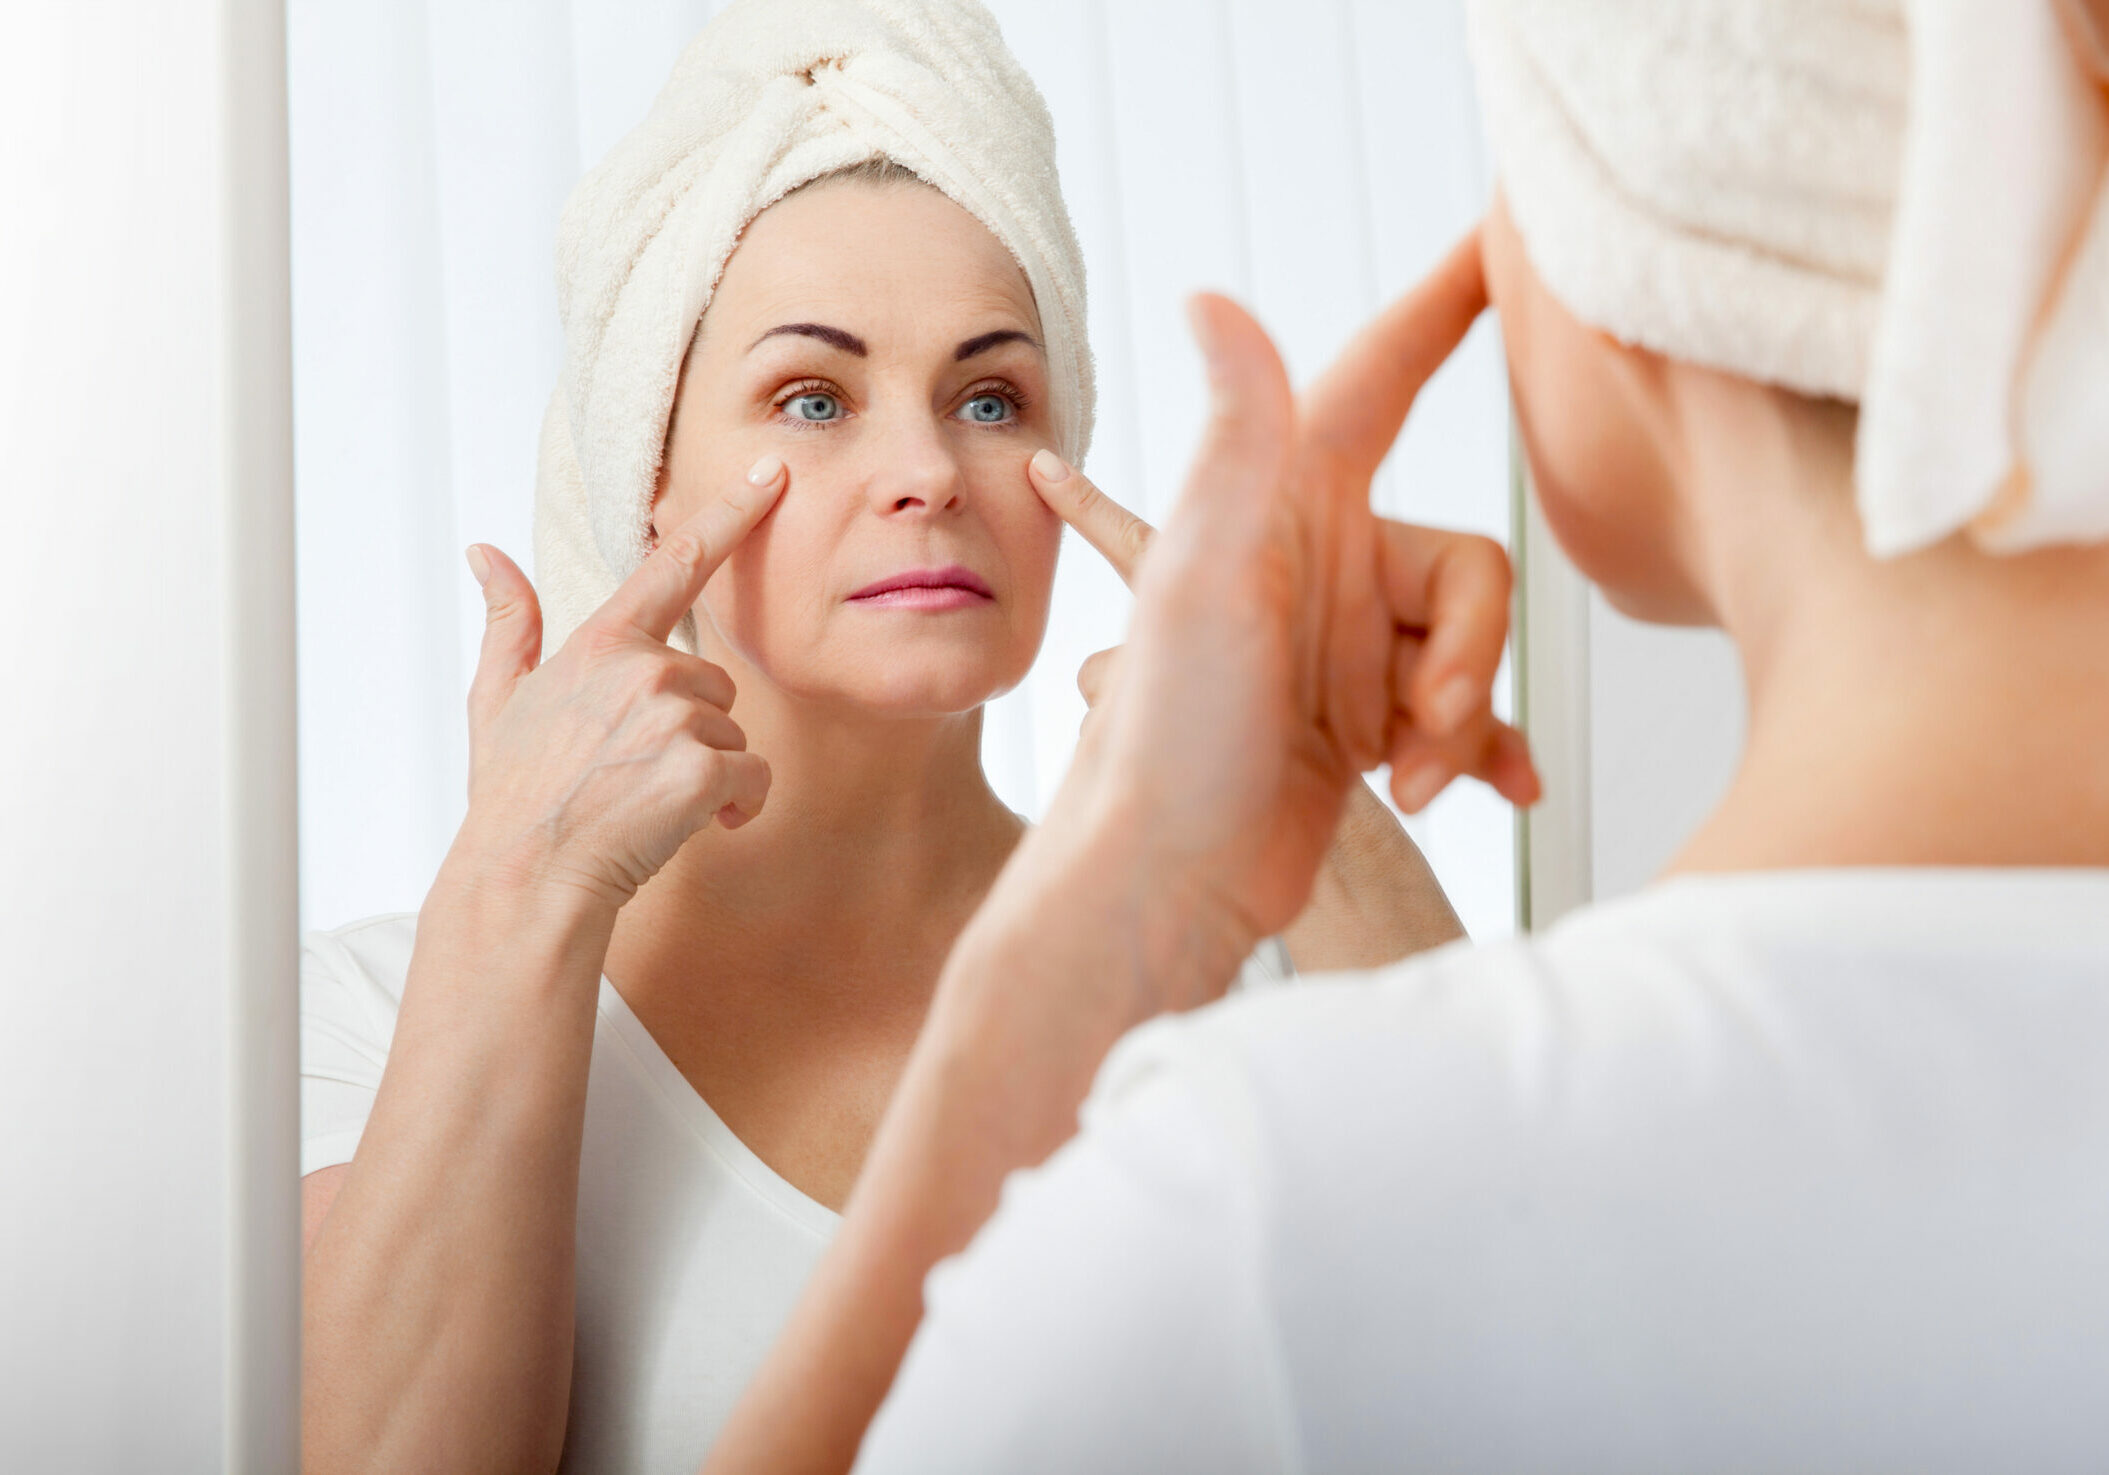 Middle aged woman looking at wrinkles in mirror. Plastic surgery and collagen injections. Makeup. Macro face. Selective focus on the face. Realistic images with their own imperfections.